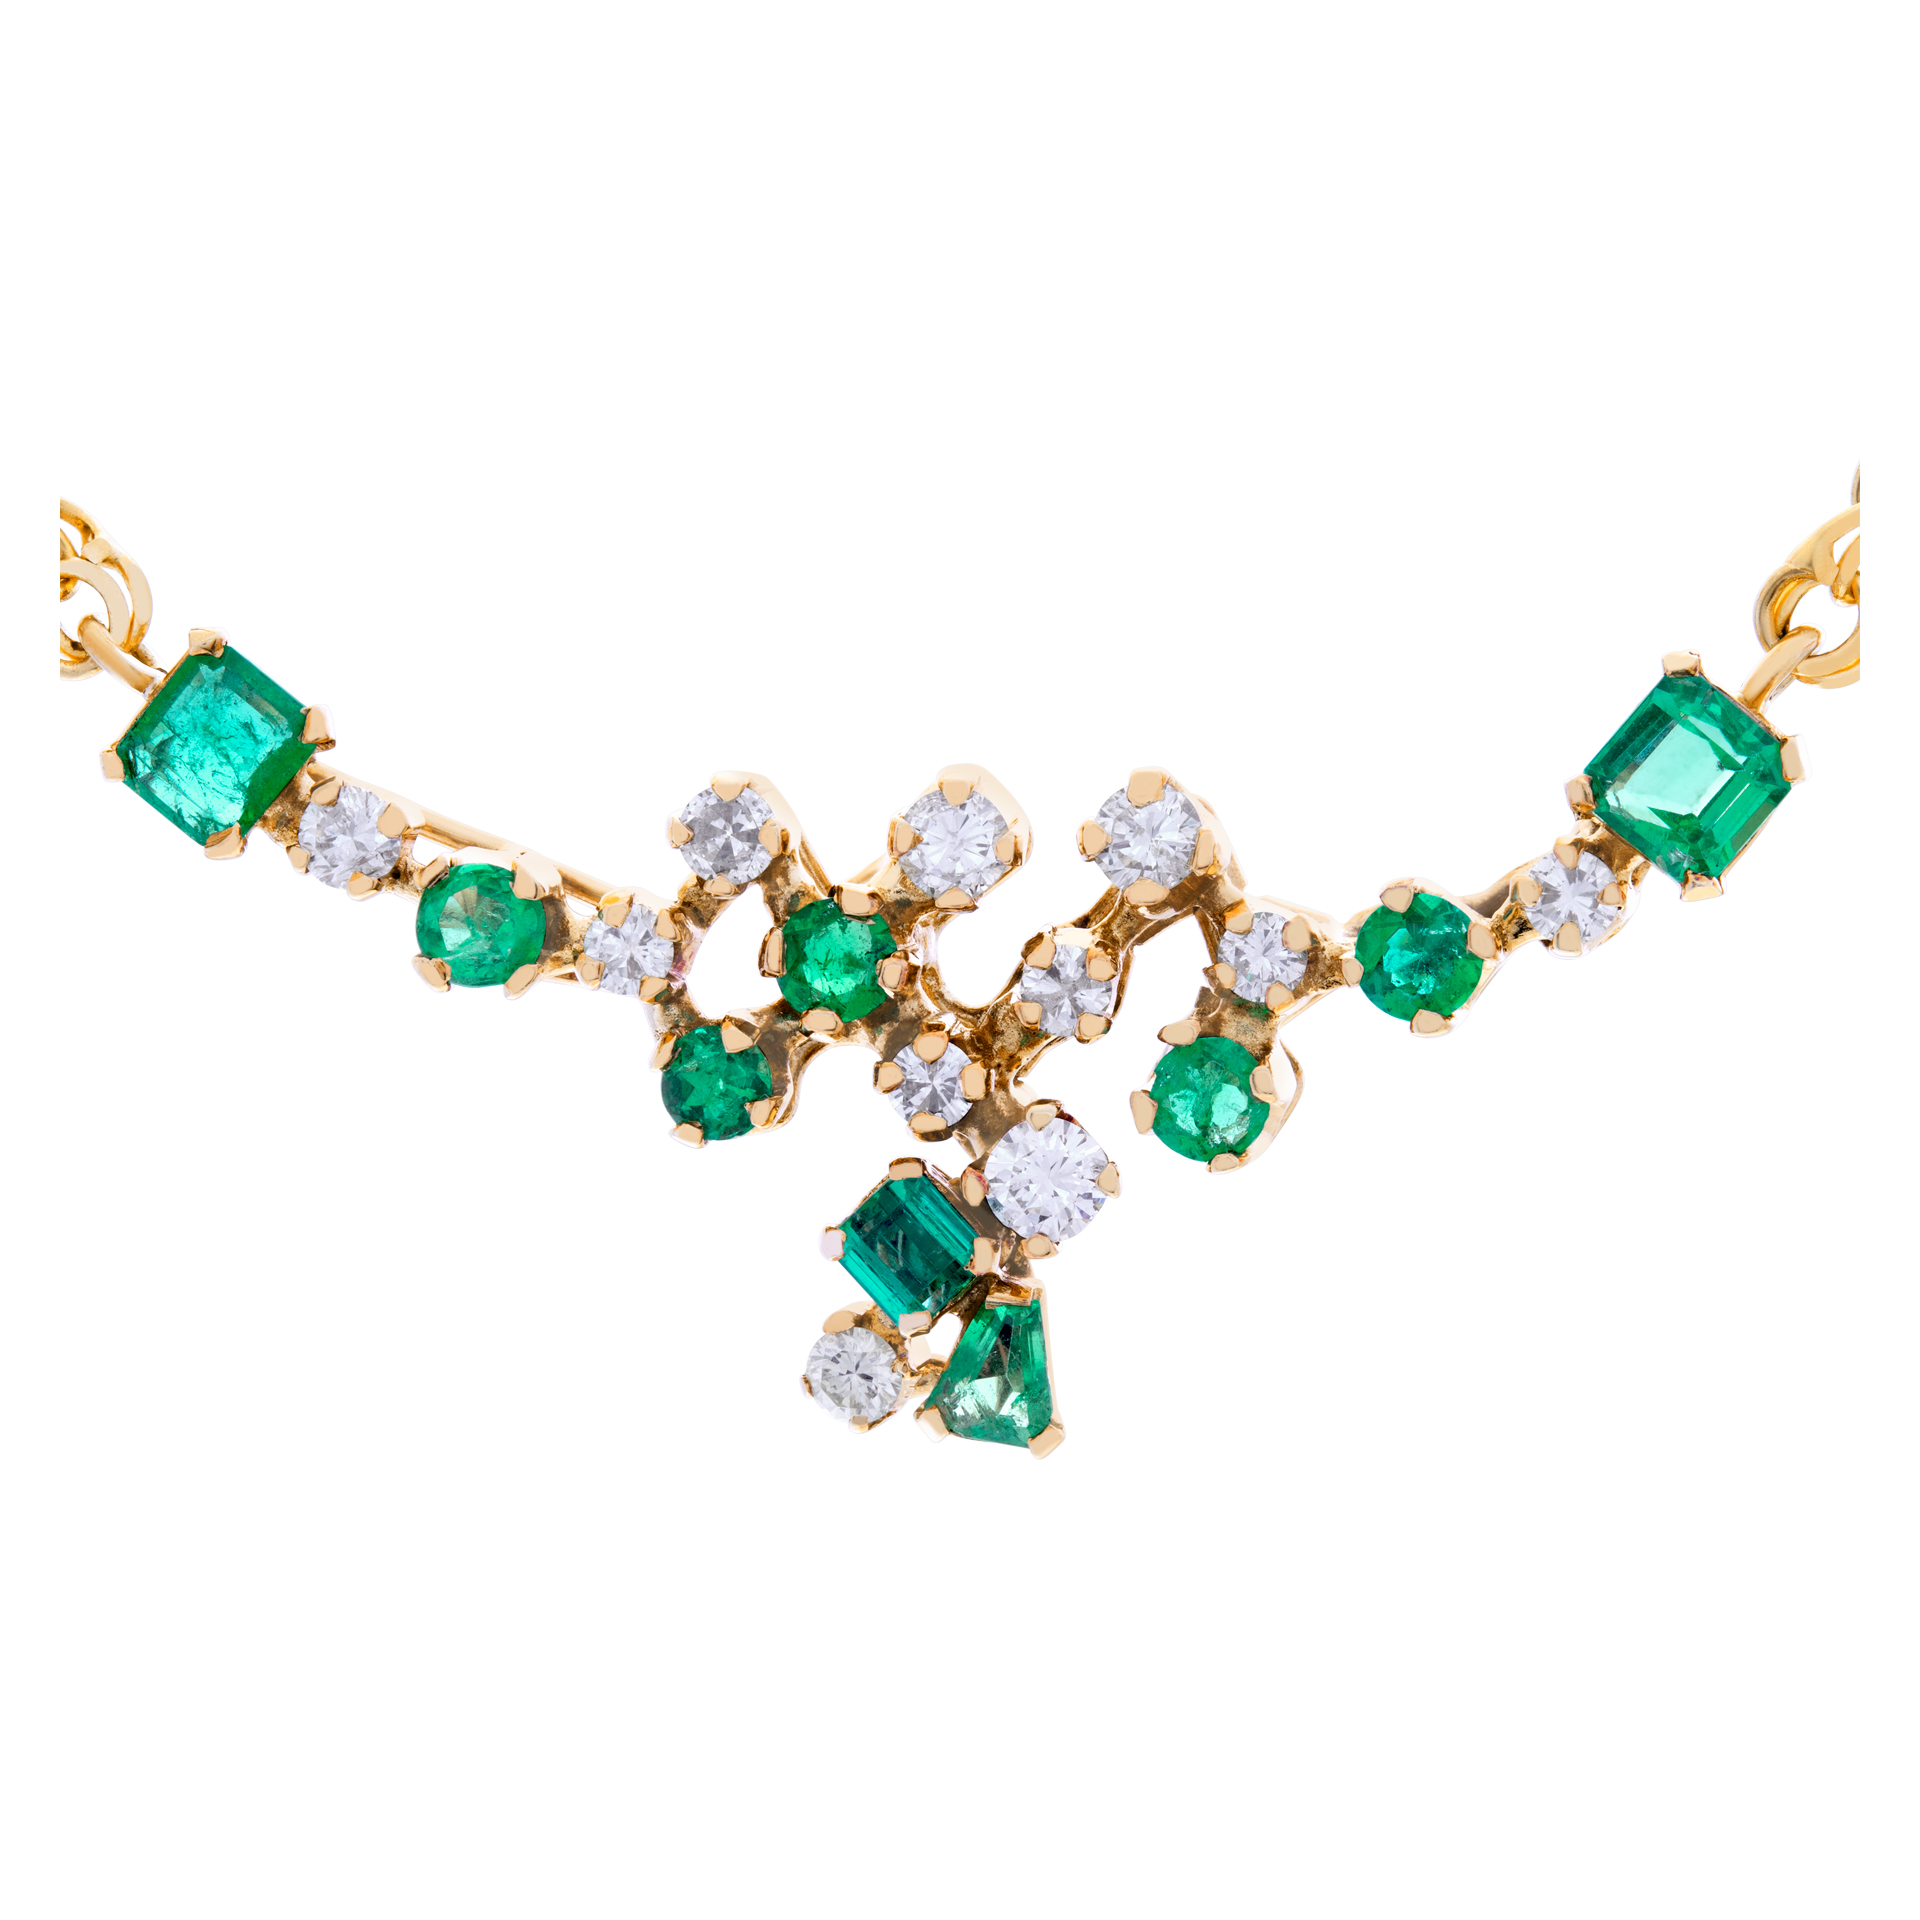 Emerald And Diamond Cluster Necklace Set In 18k Yellow Gold